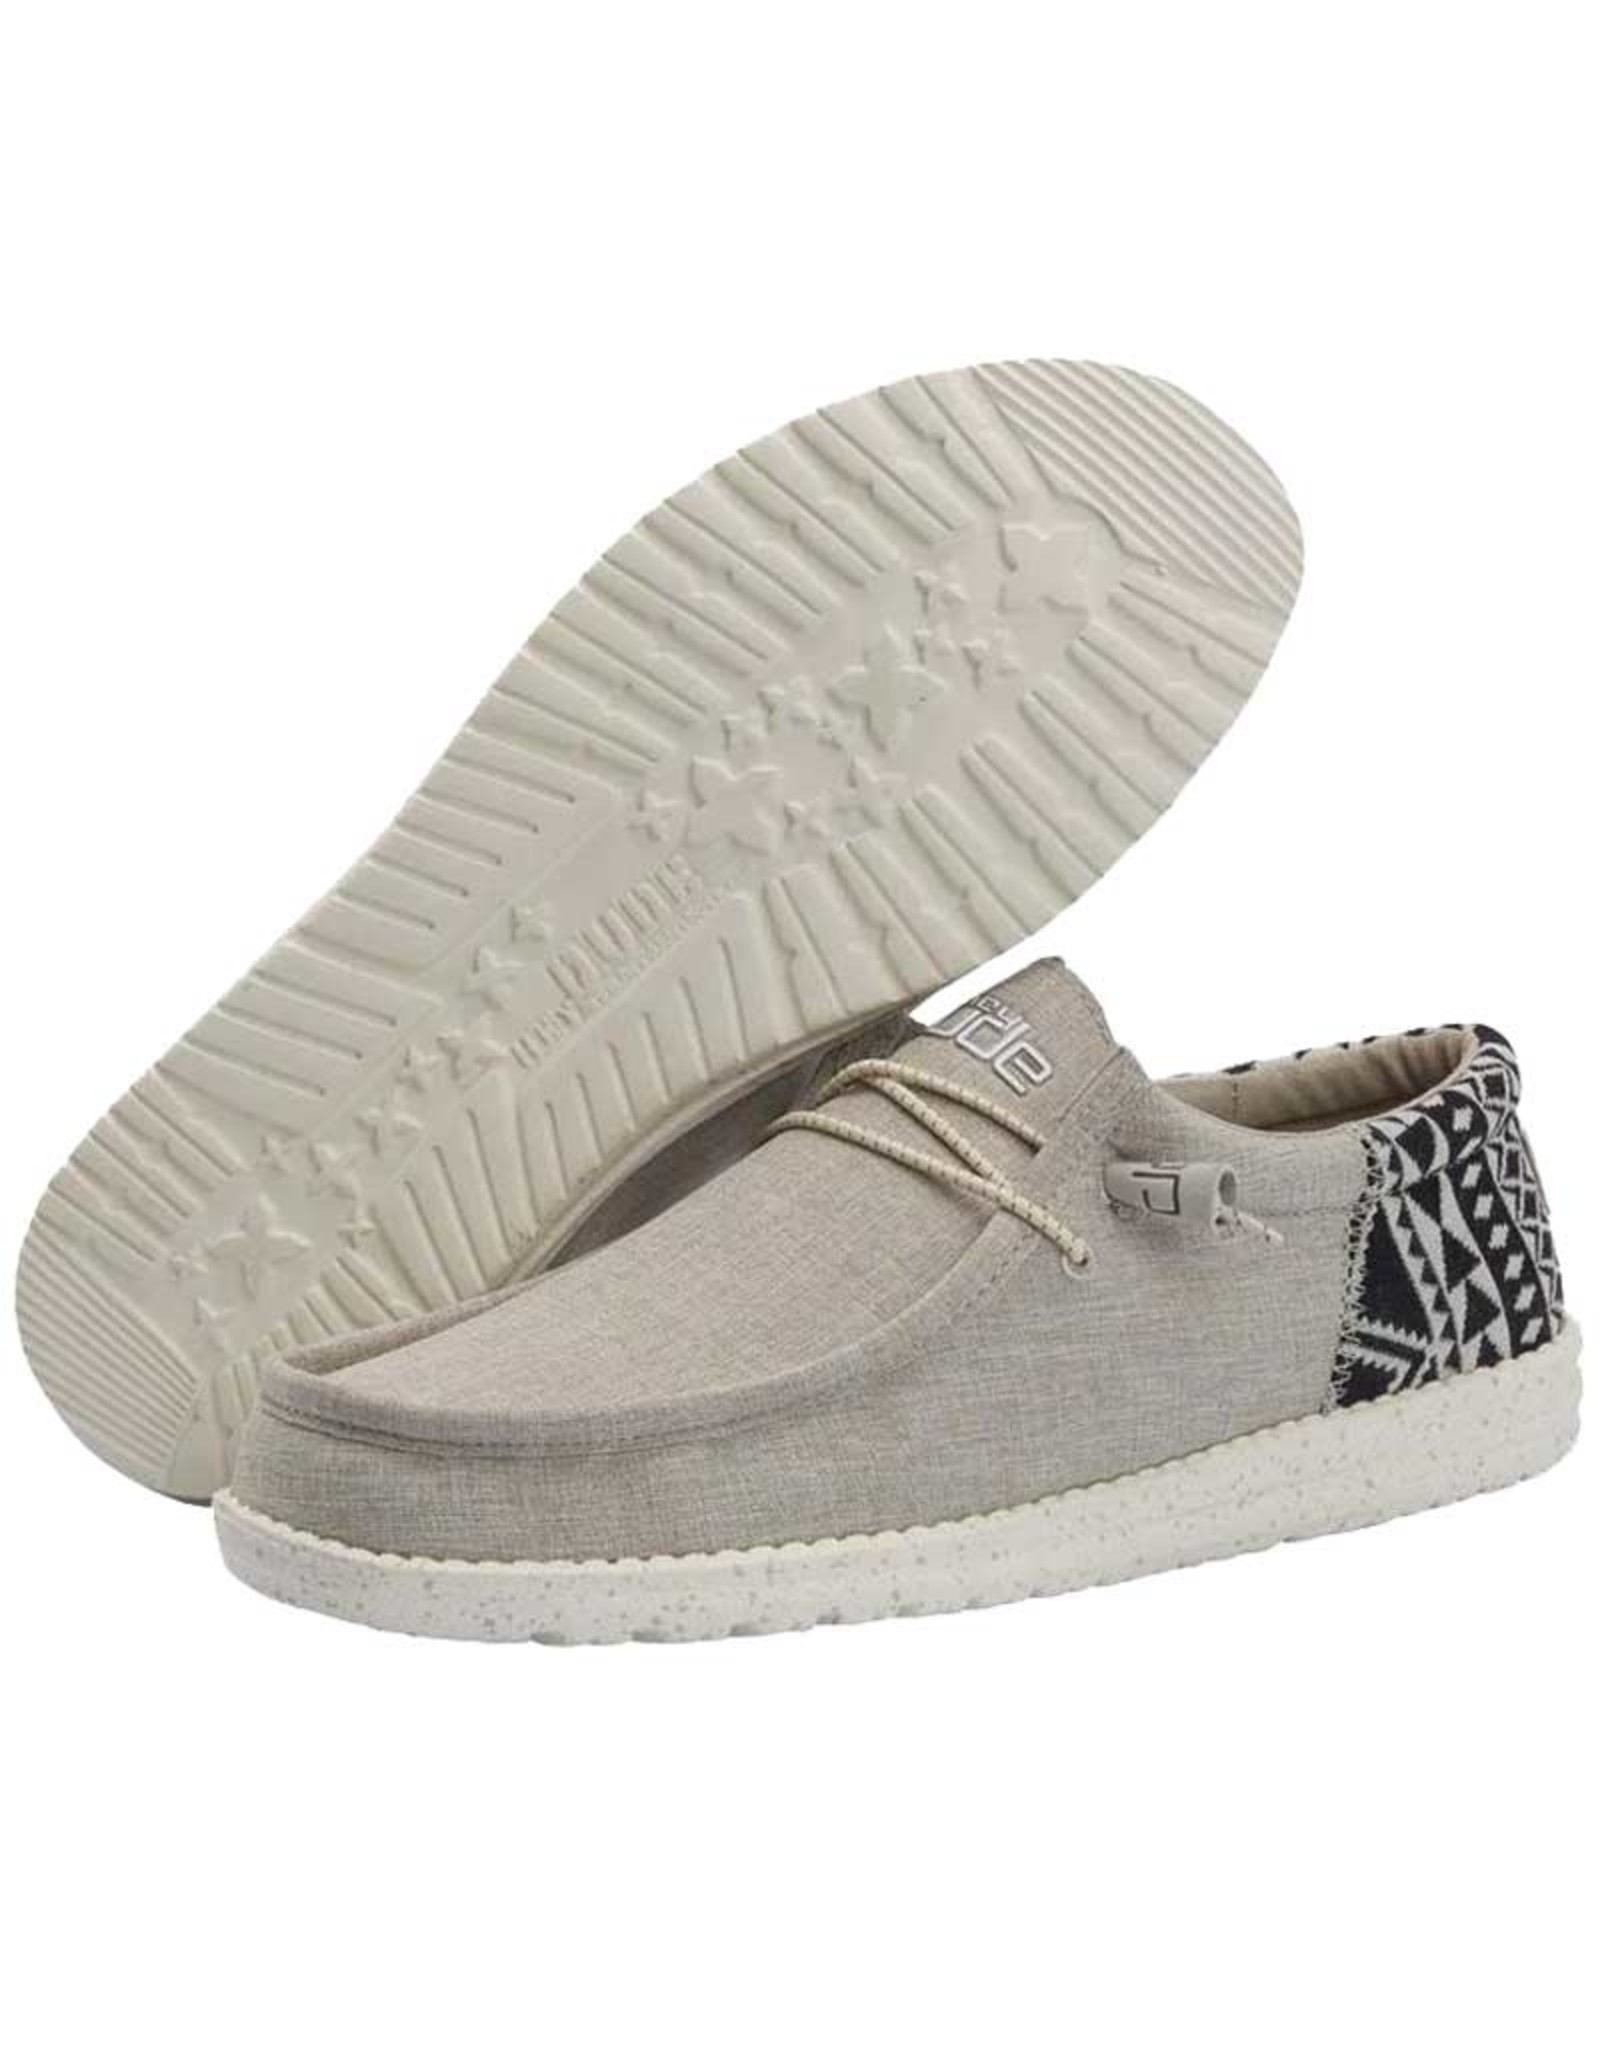 Hey Dude Hey Dude Wally Funk Jacquard Bungee 40010-2YP Casual Shoes